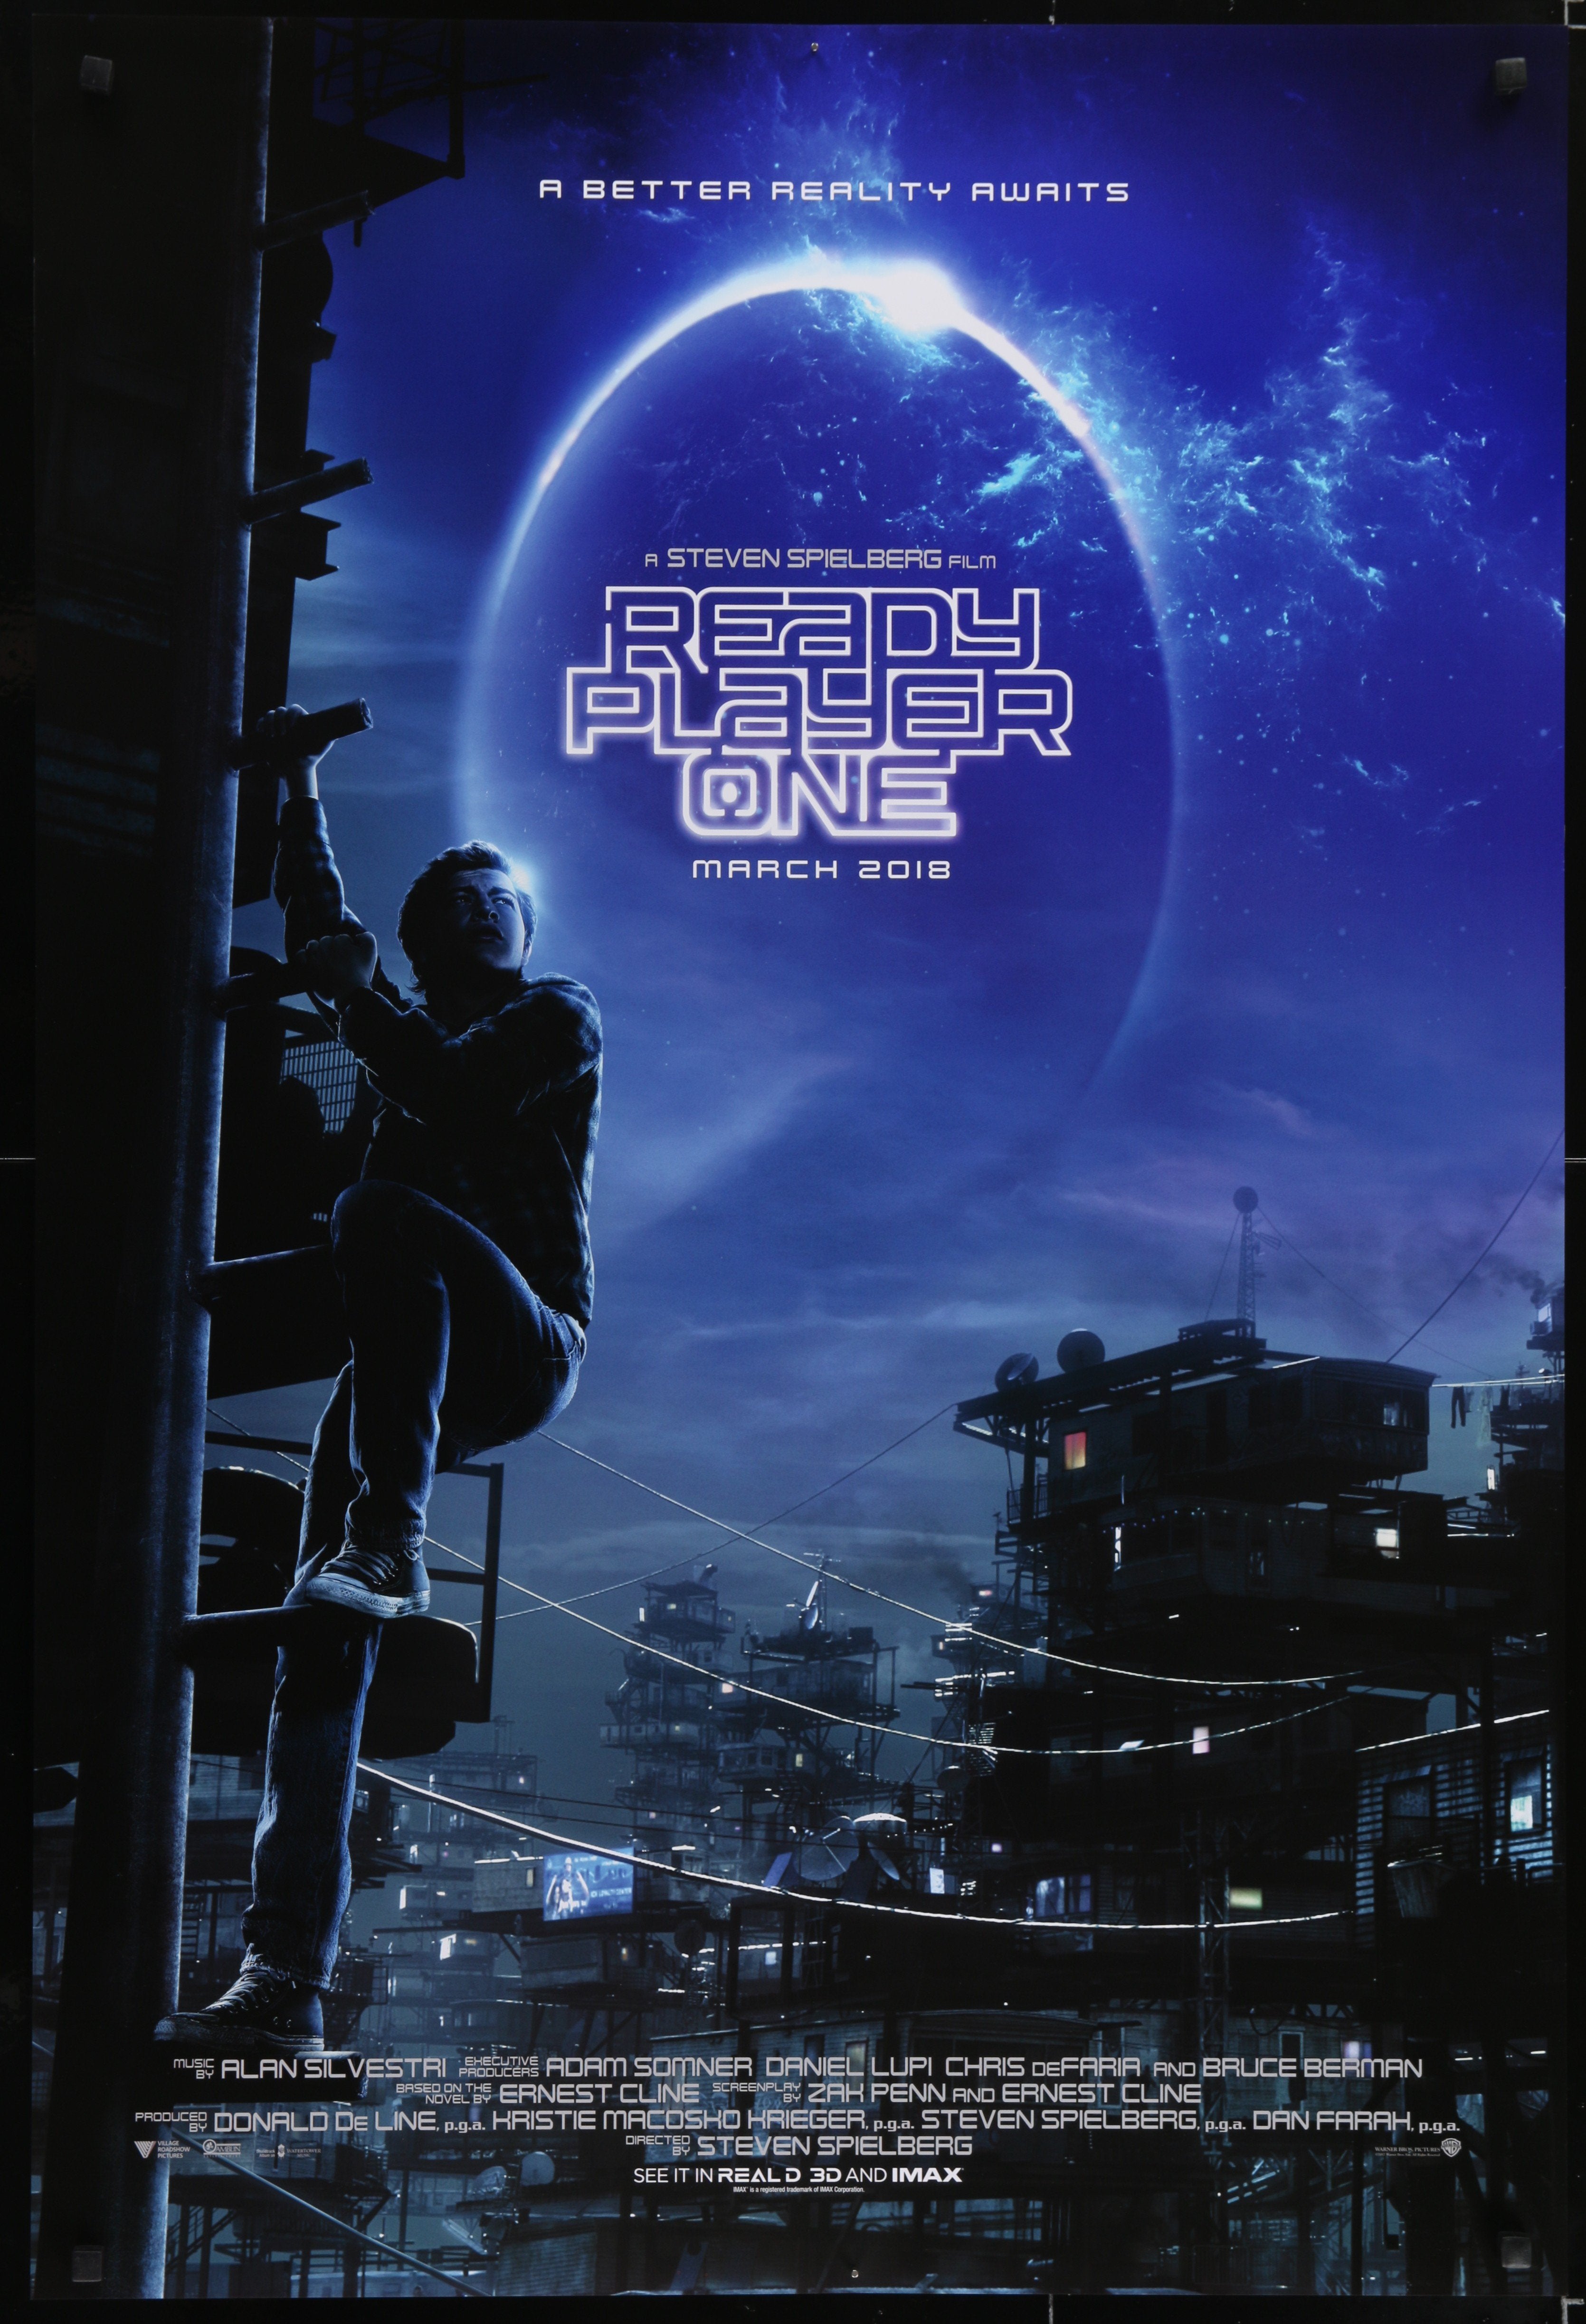 Ready Player One - 2018 - Original Movie Poster - Art of the Movies